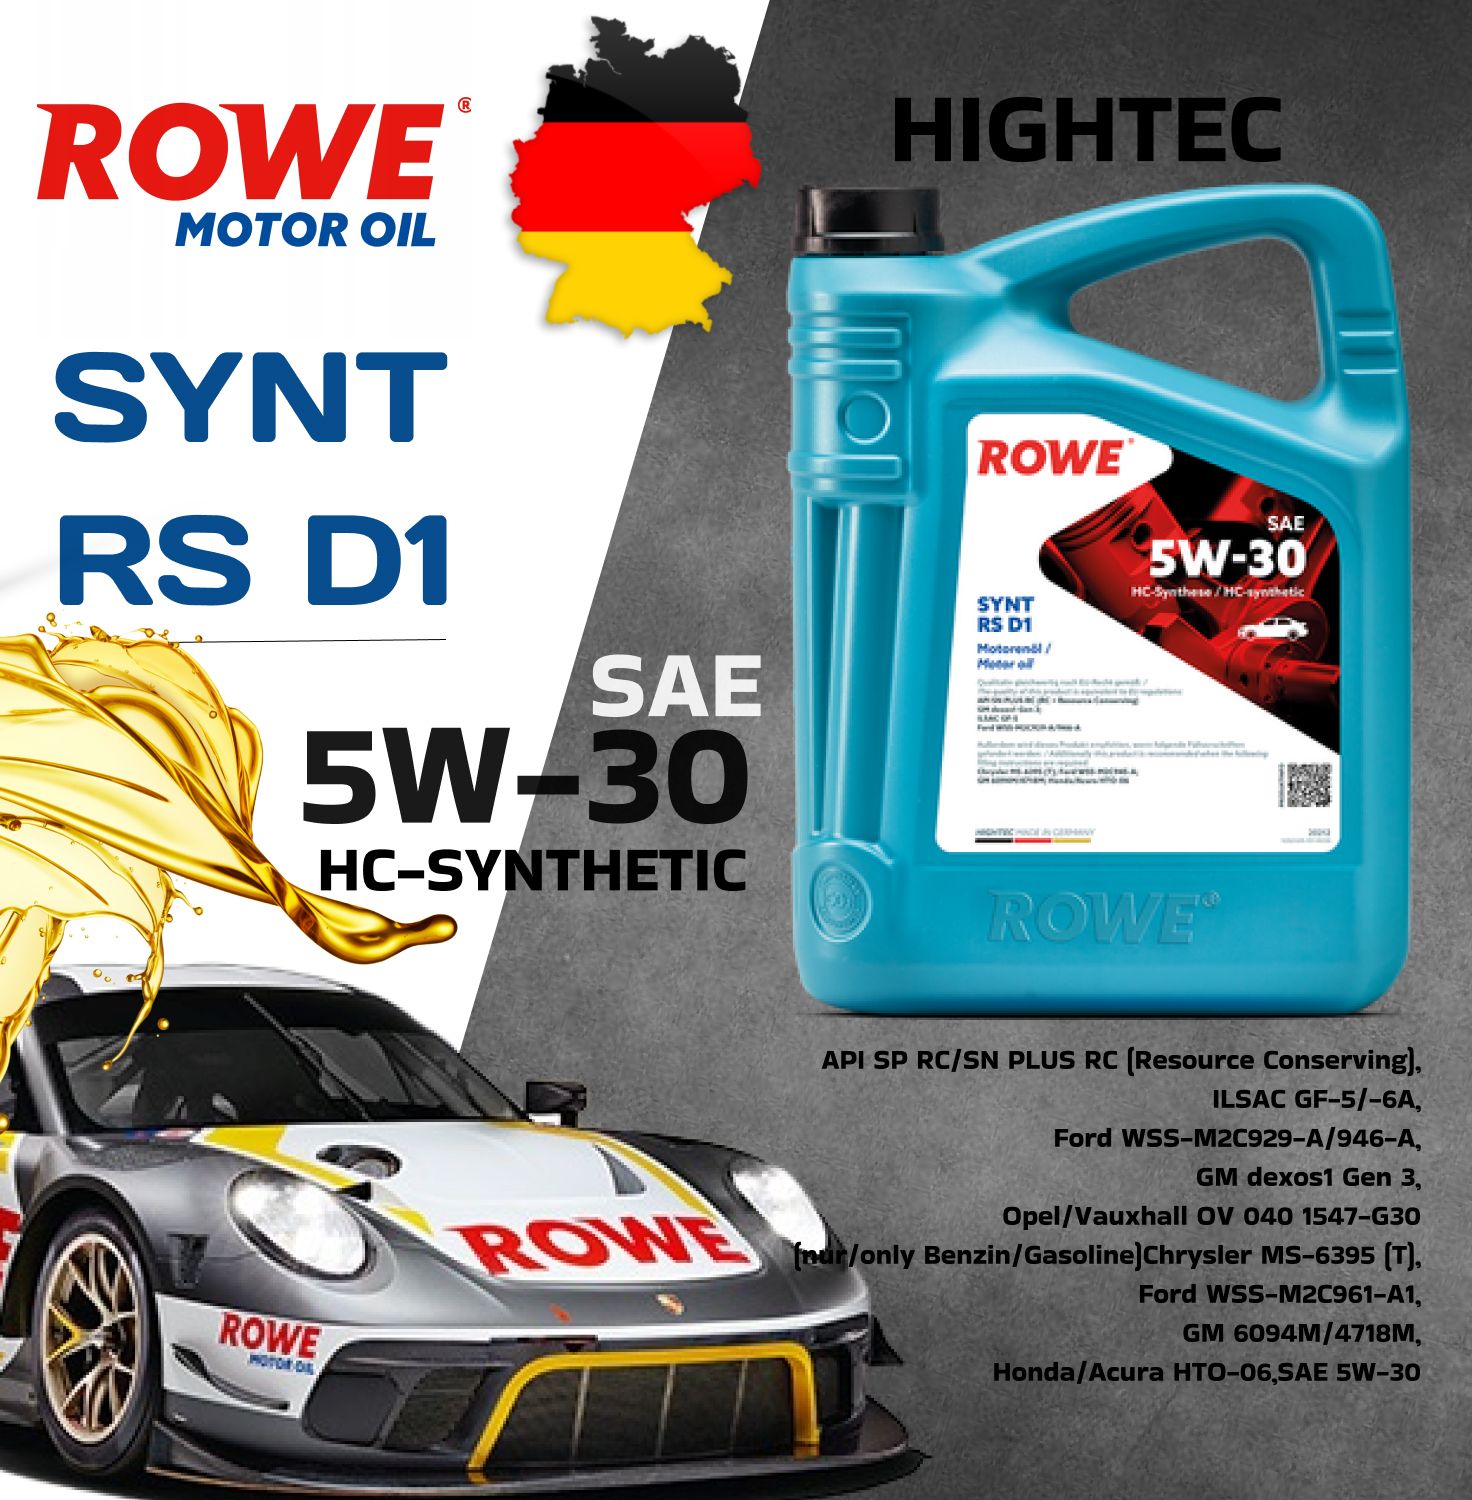 Hightec Synt RS d1 SAE 5w-30. Rowе моторное 5w30. Моторное масло Rowe Hightec Synt RS,5w30,5. Rowe Hightec VDL 150 60 Л.